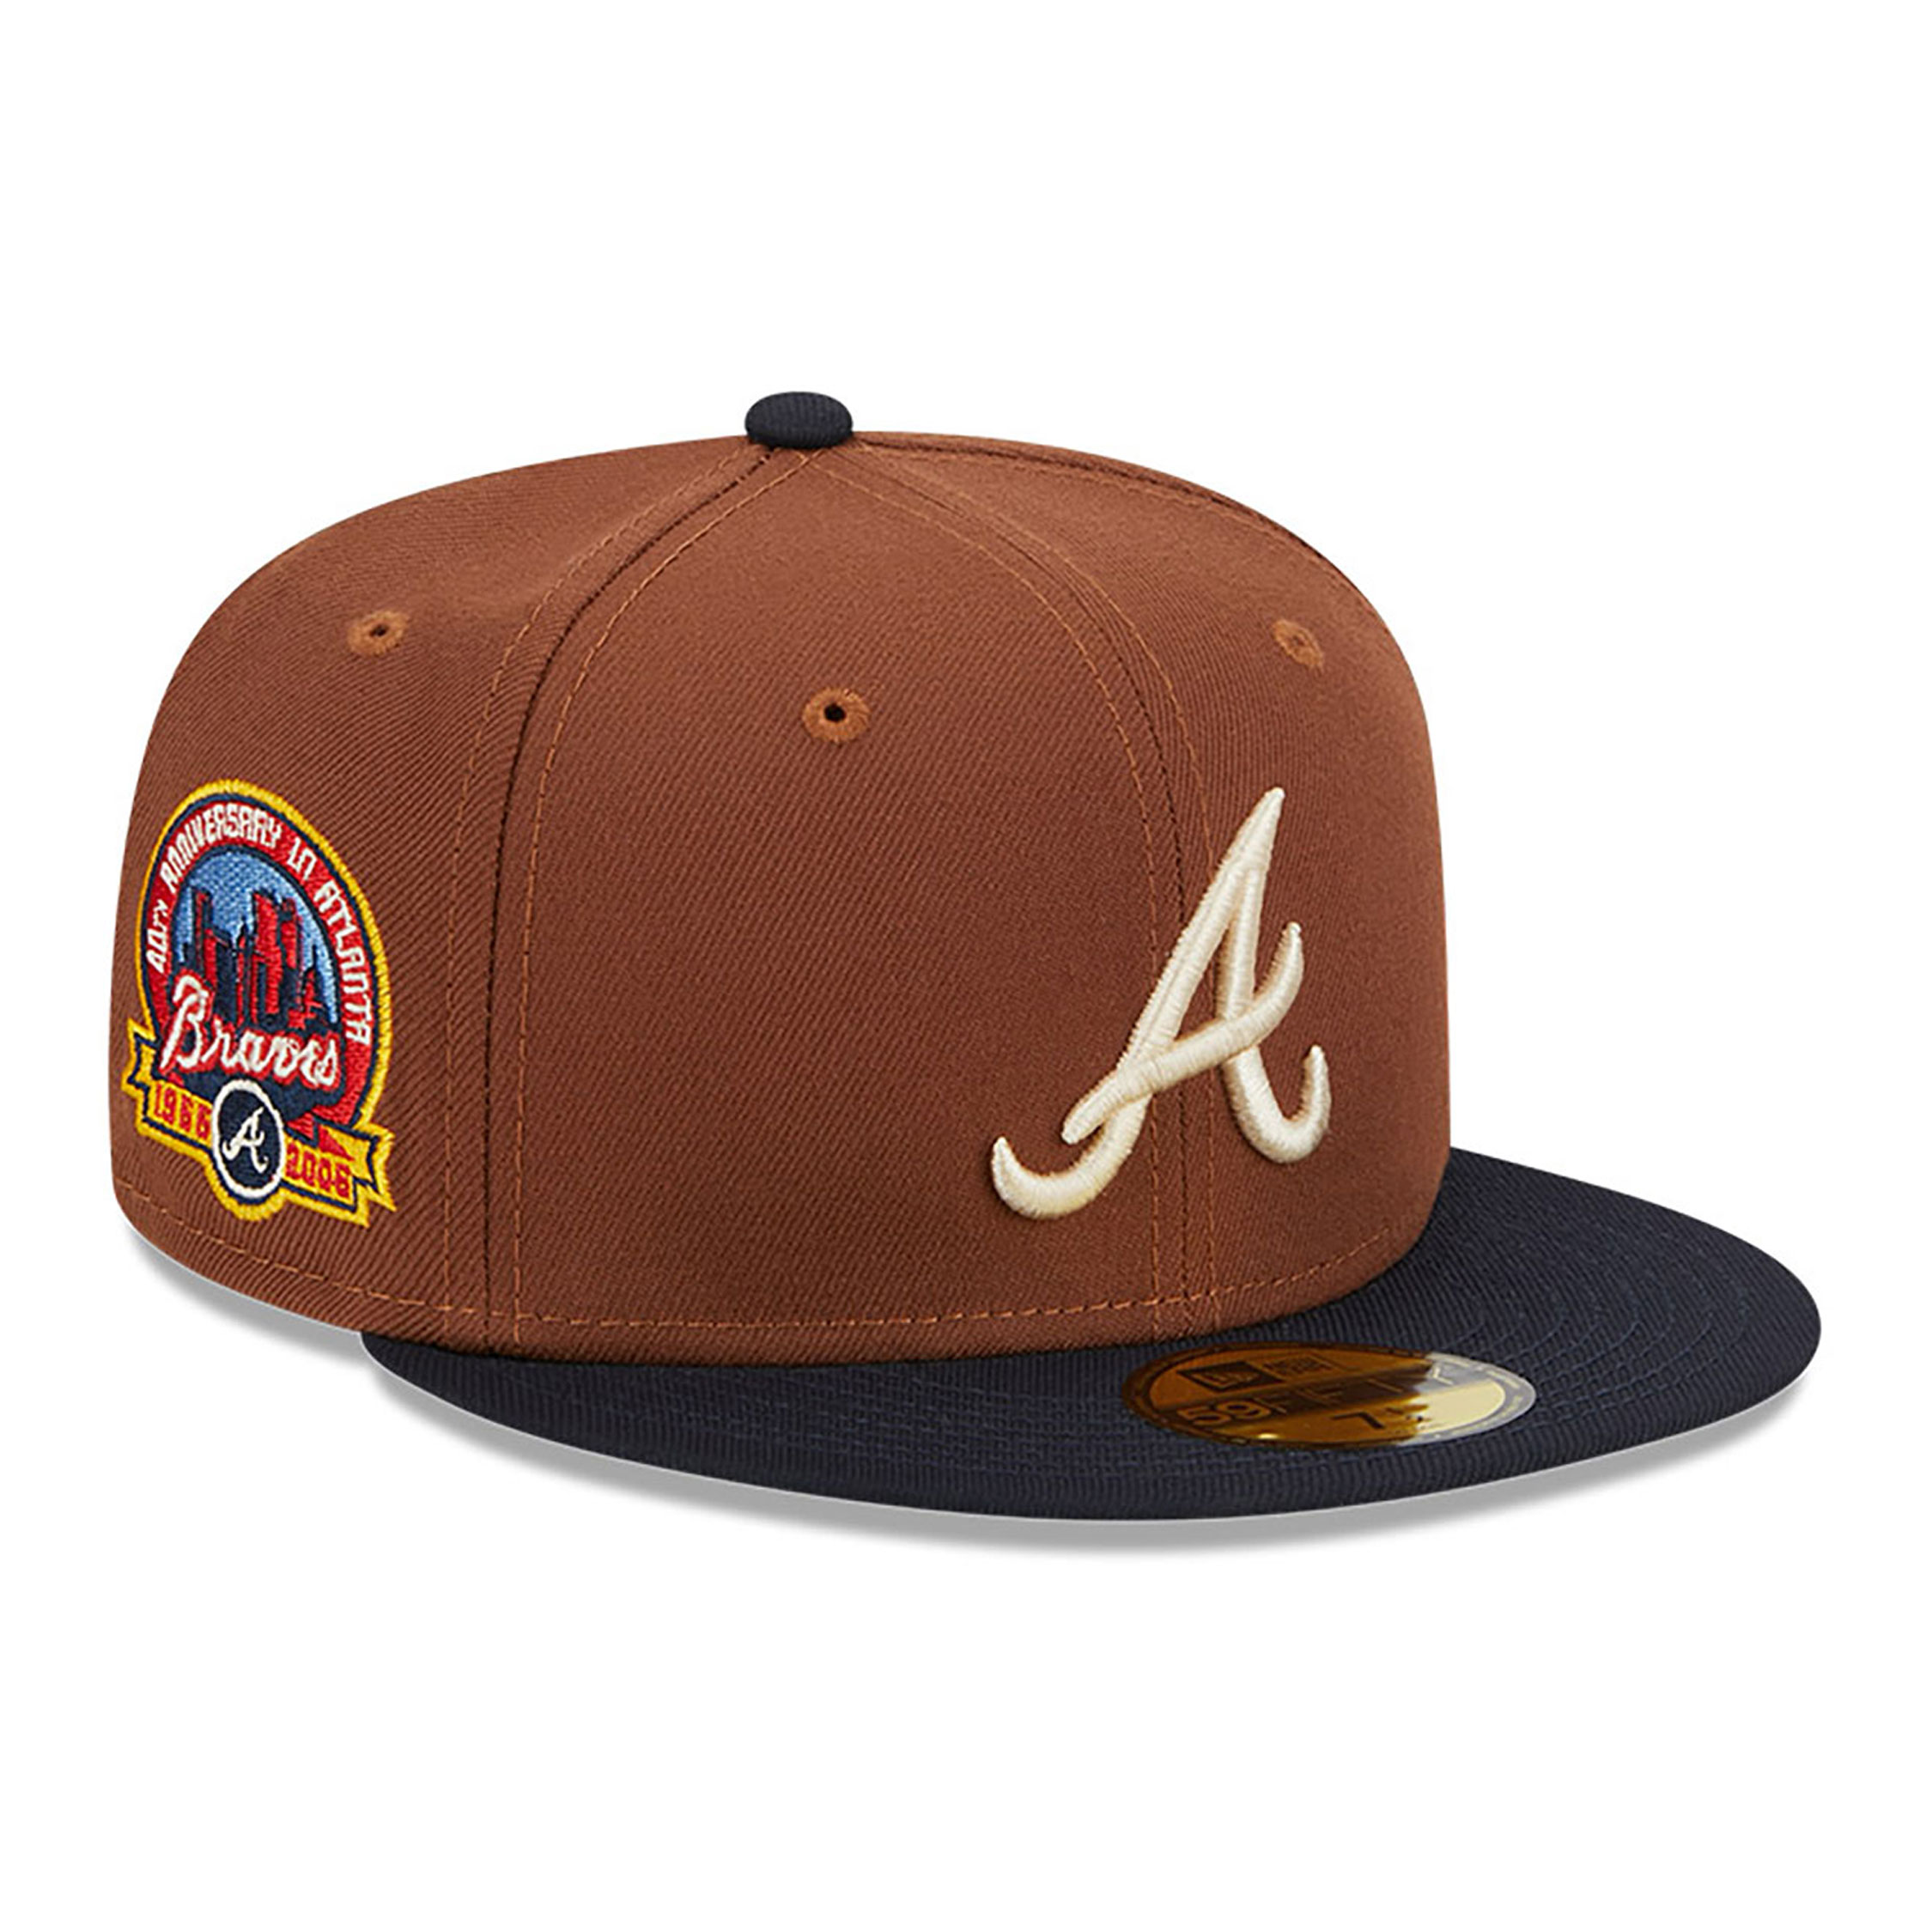 Atlanta Braves Harvest Brown 59FIFTY Fitted Cap